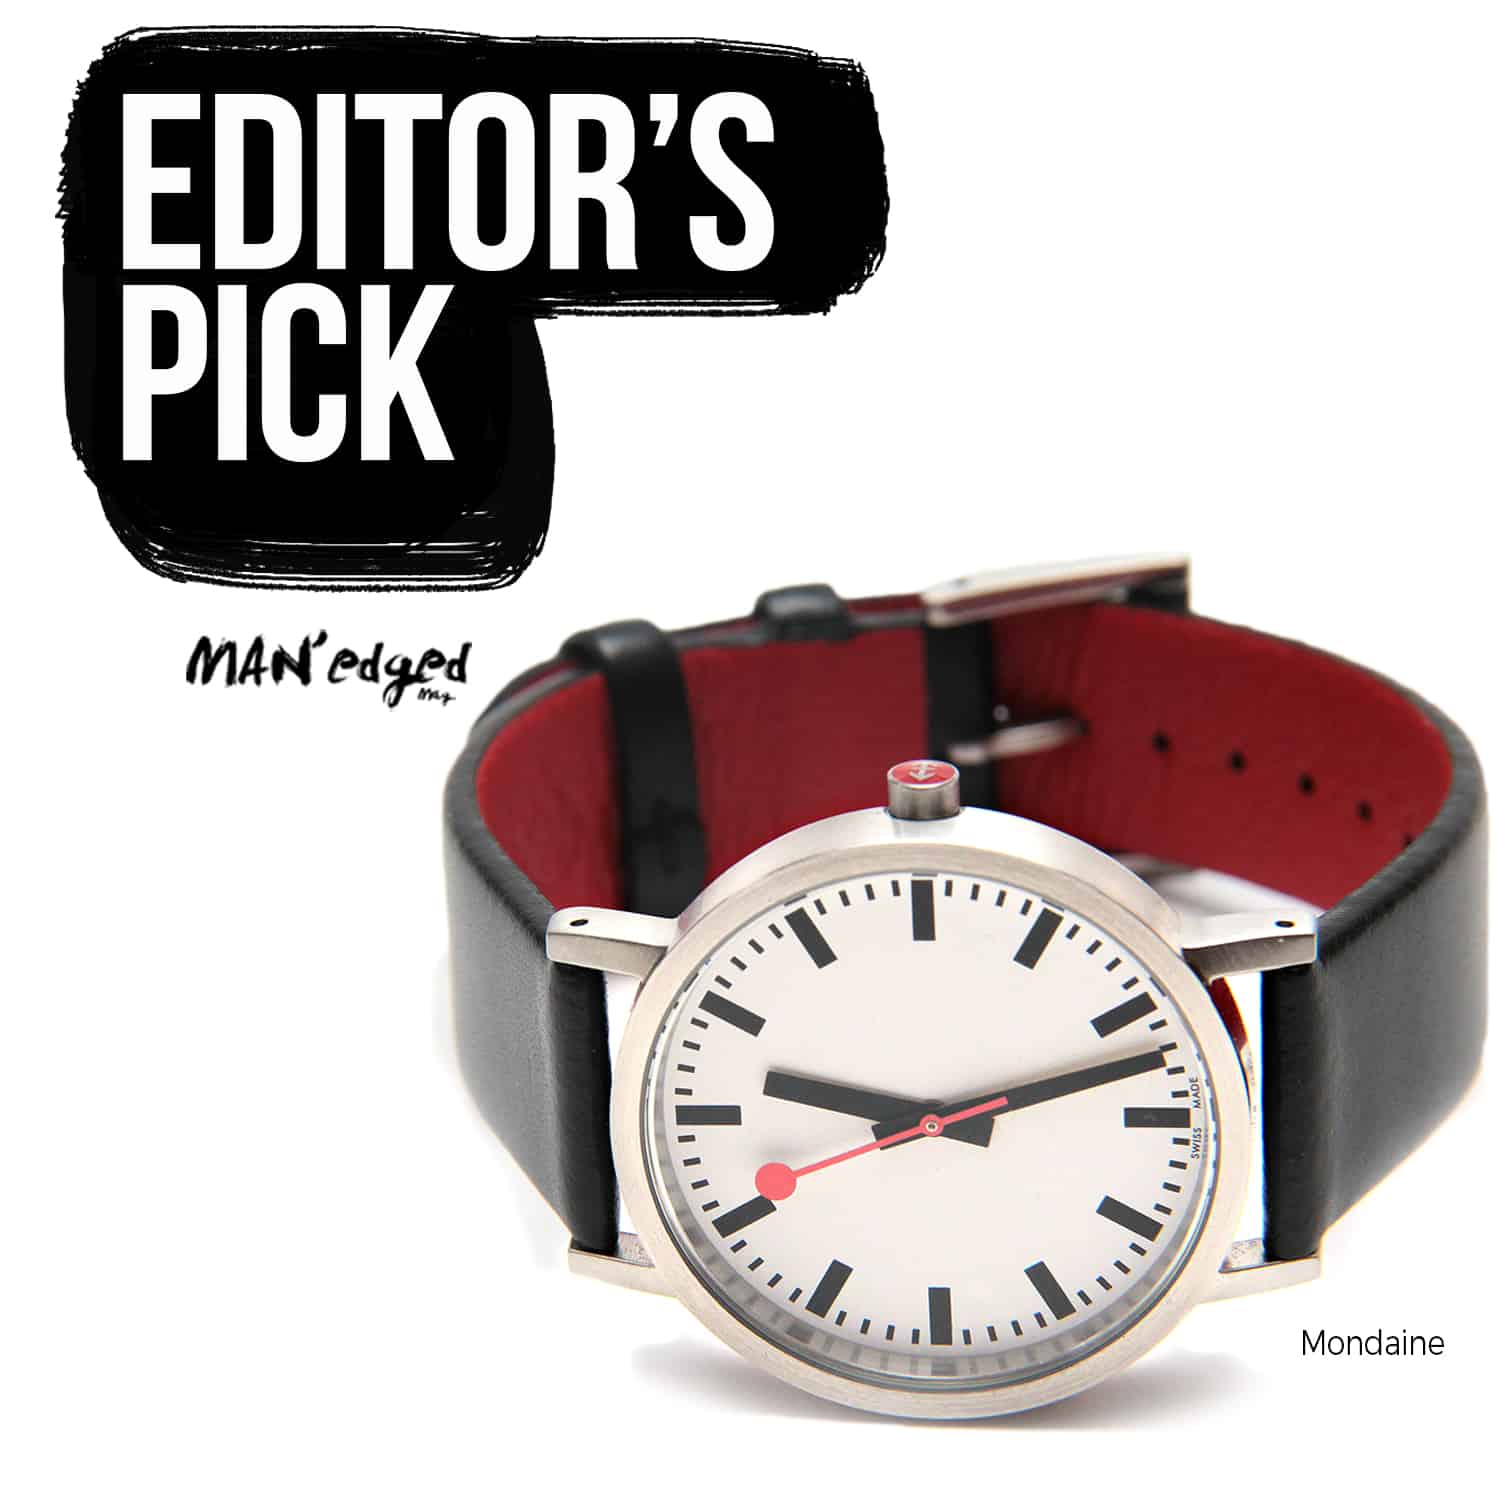 Editor's Pick highlight featuring the men's watch by Mondaine SBB Classic Pure Watch Close Up